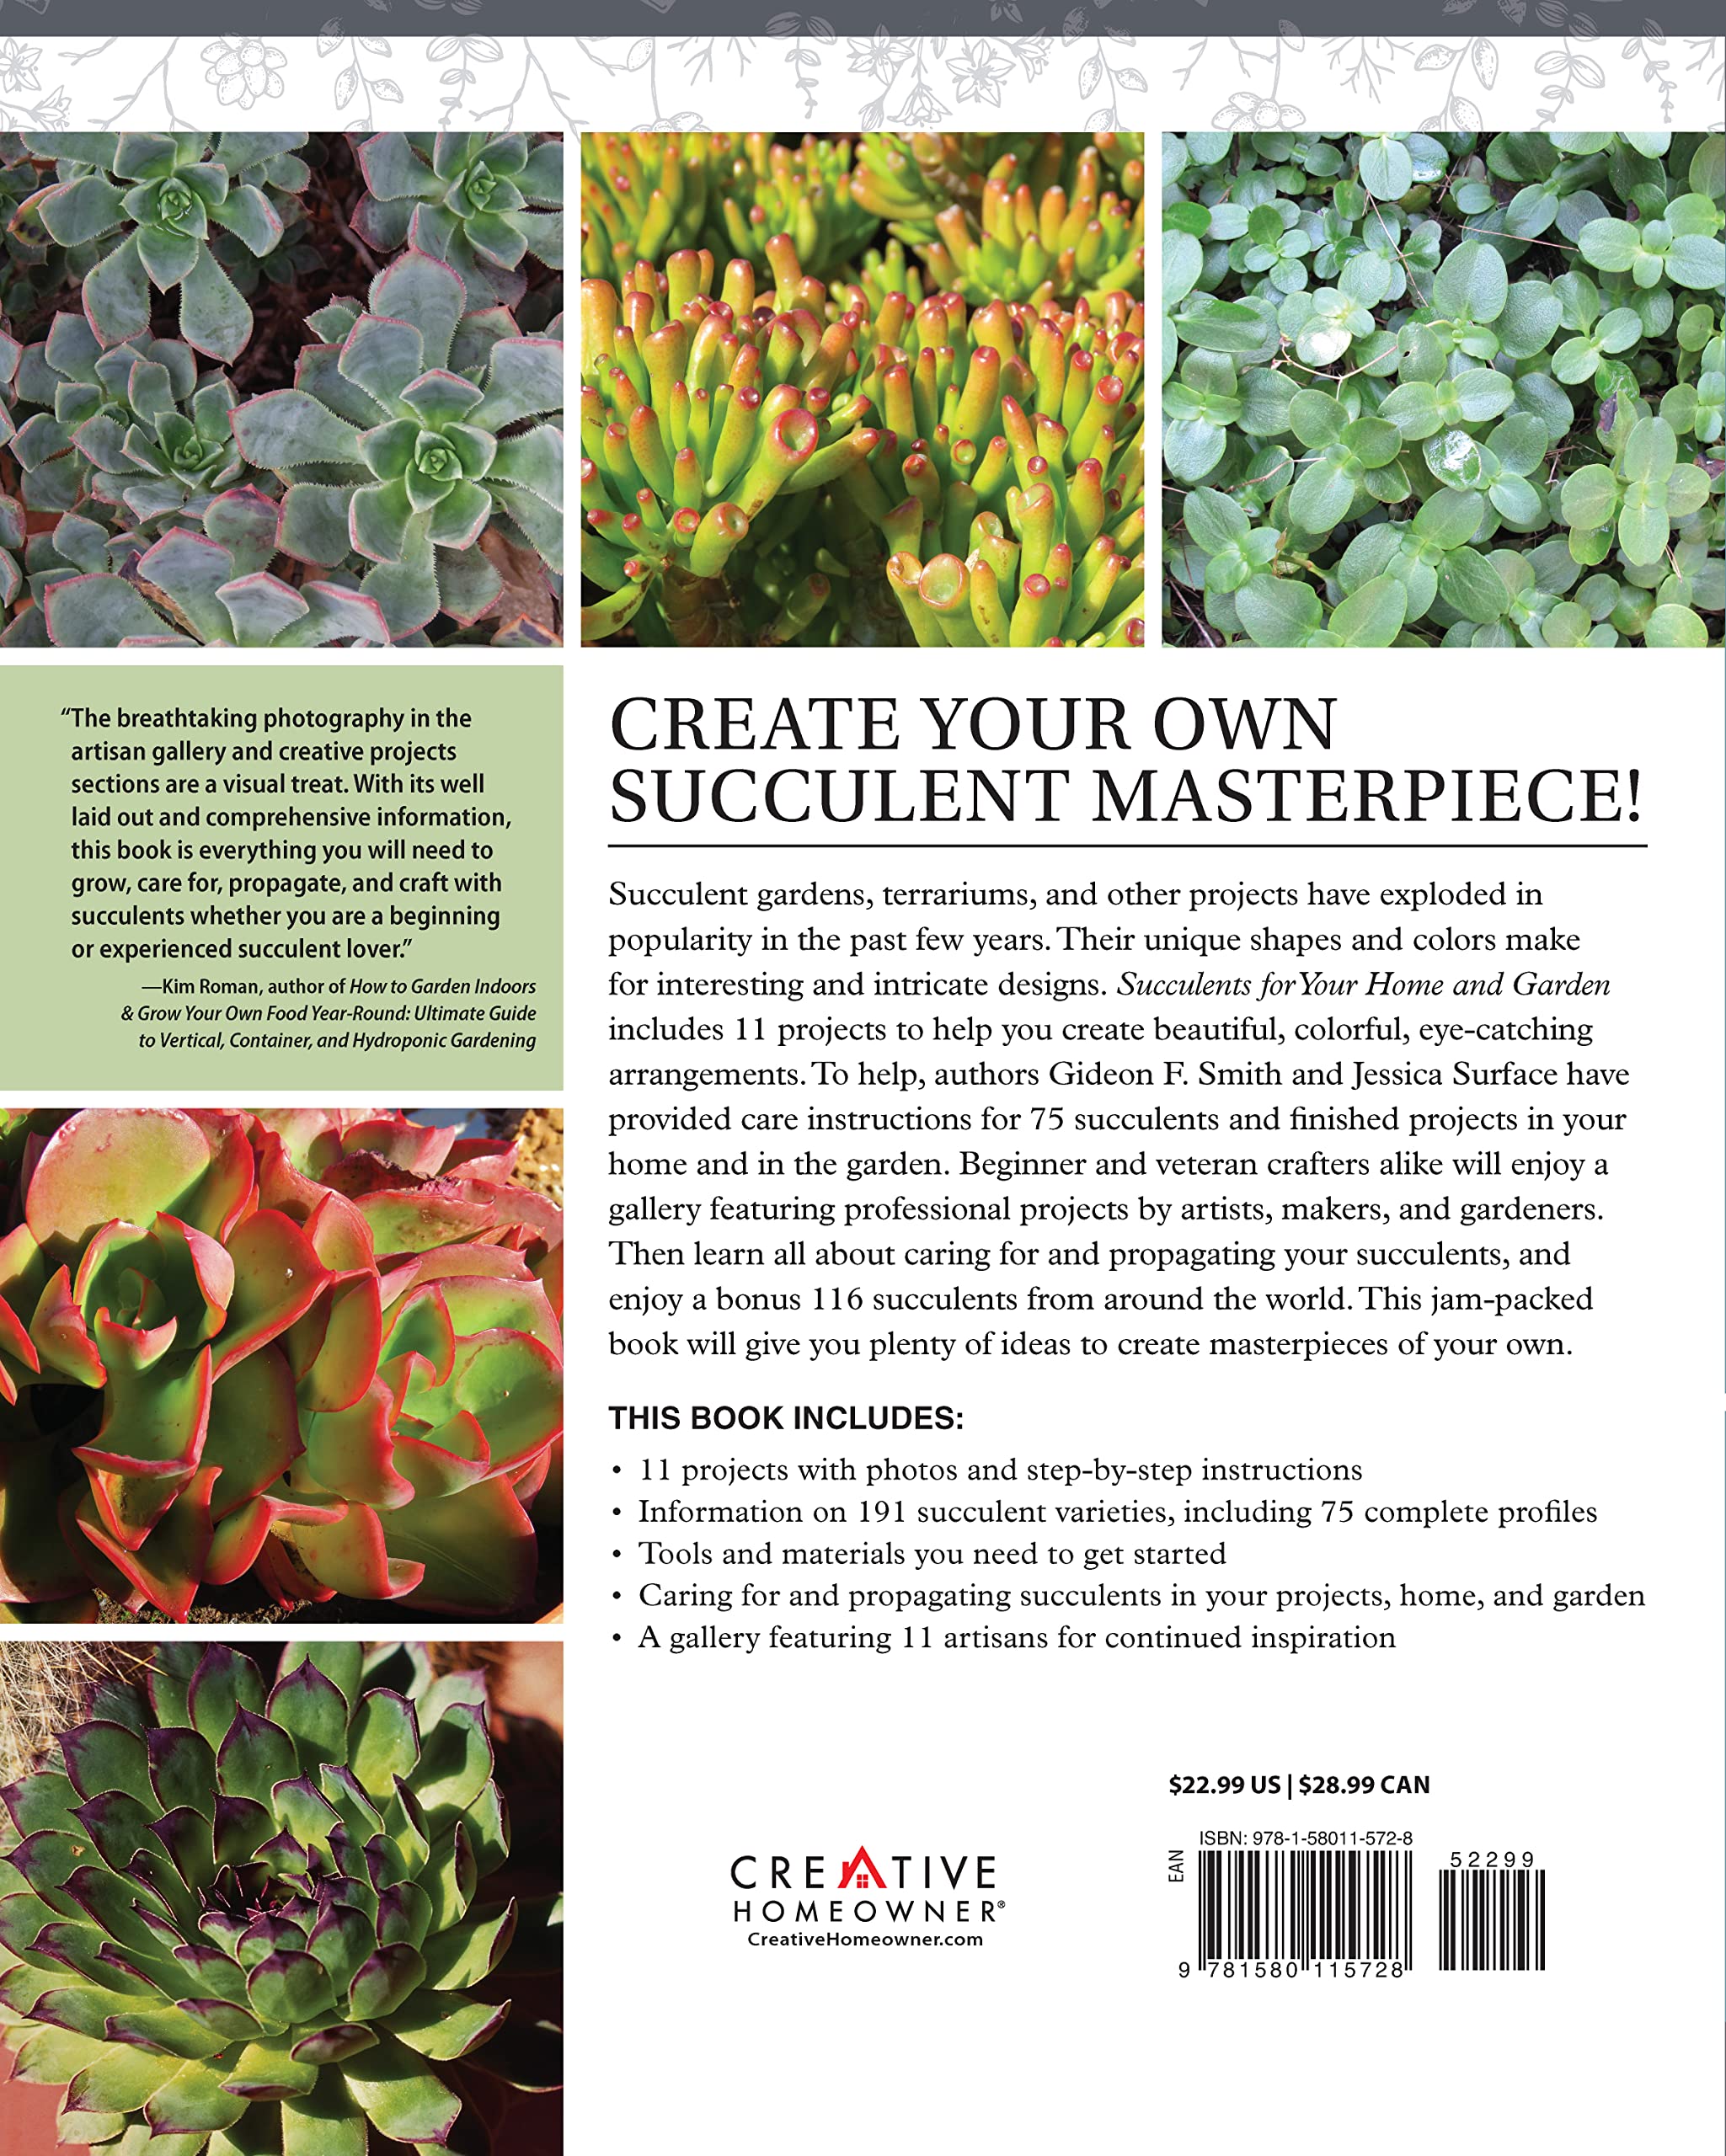 Succulents for Your Home and Garden: A Guide to Growing 191 Beautiful Varieties & 11 Step-by-Step Crafts and Arrangements (Creative Homeowner) Gardening, Crafting, and Plant Care